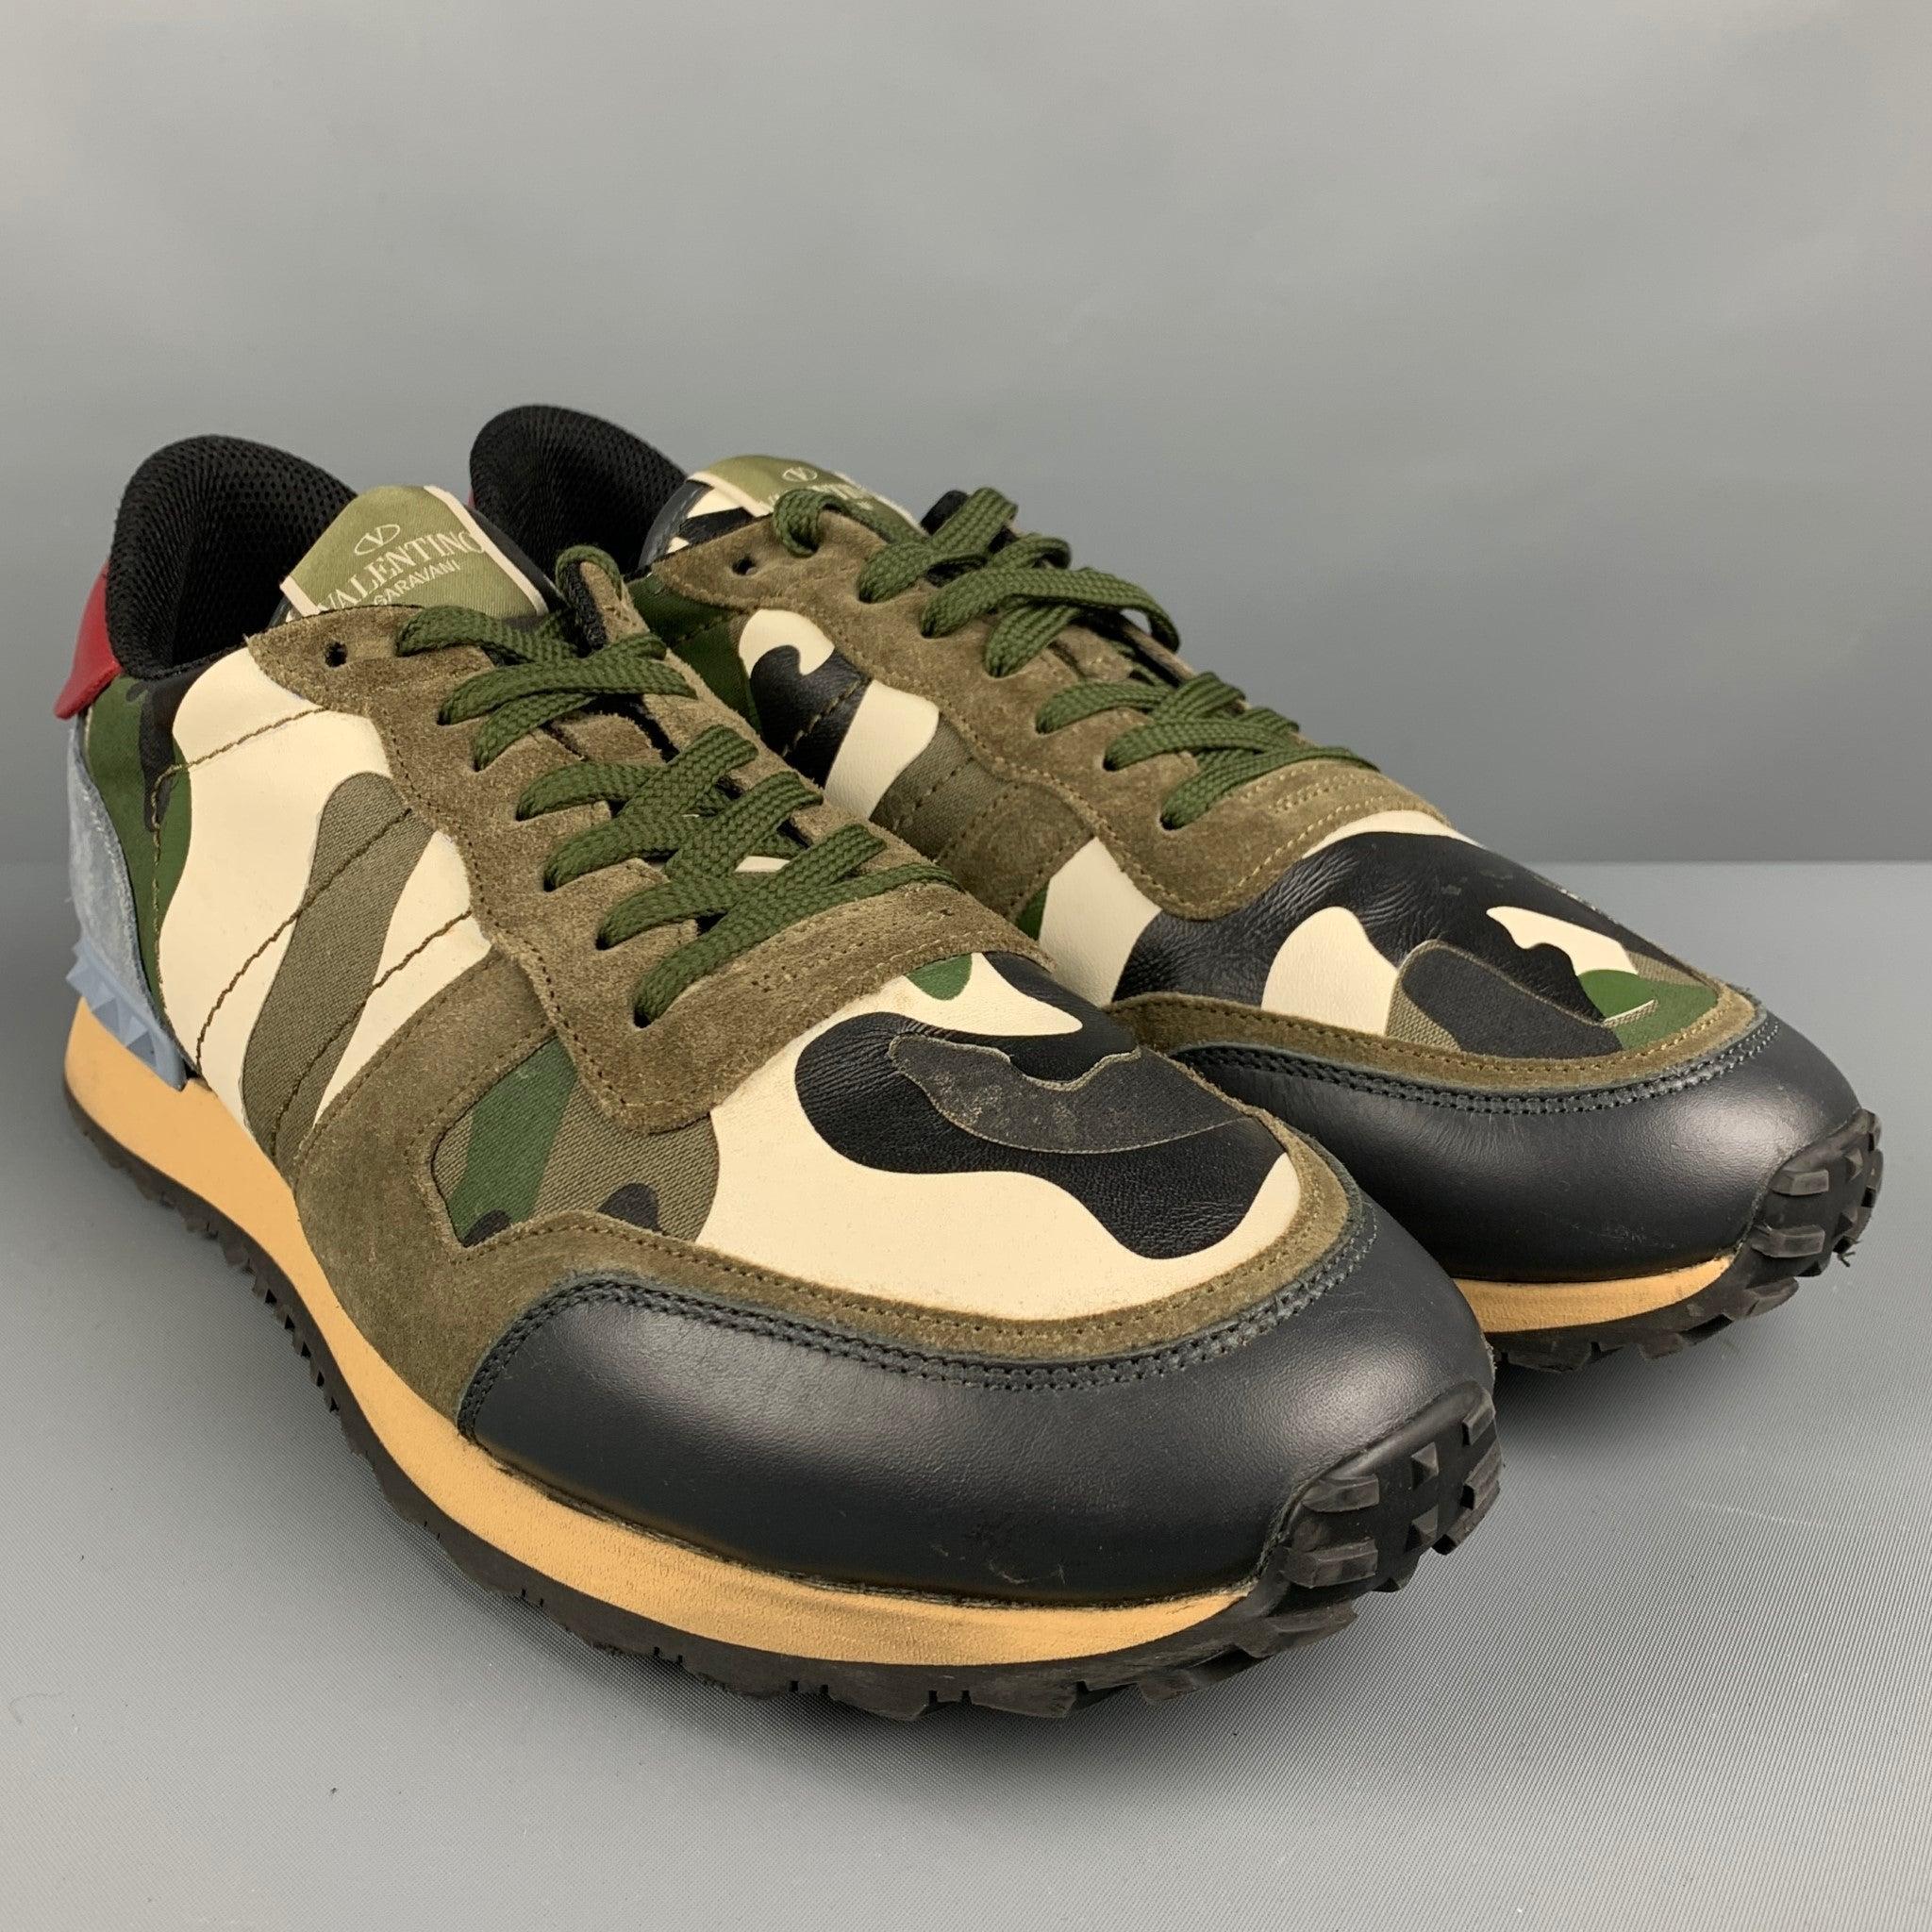 VALENTINO sneakers in a multi color leather featuring a camo pattern, suede trim and heel, and low top style. Comes with box. Made in Italy. Excellent Pre-Owned Condition. 

Marked:   45/TJ 723 45Outsole: 12.25 inches  x 4.25 inches 
  
 